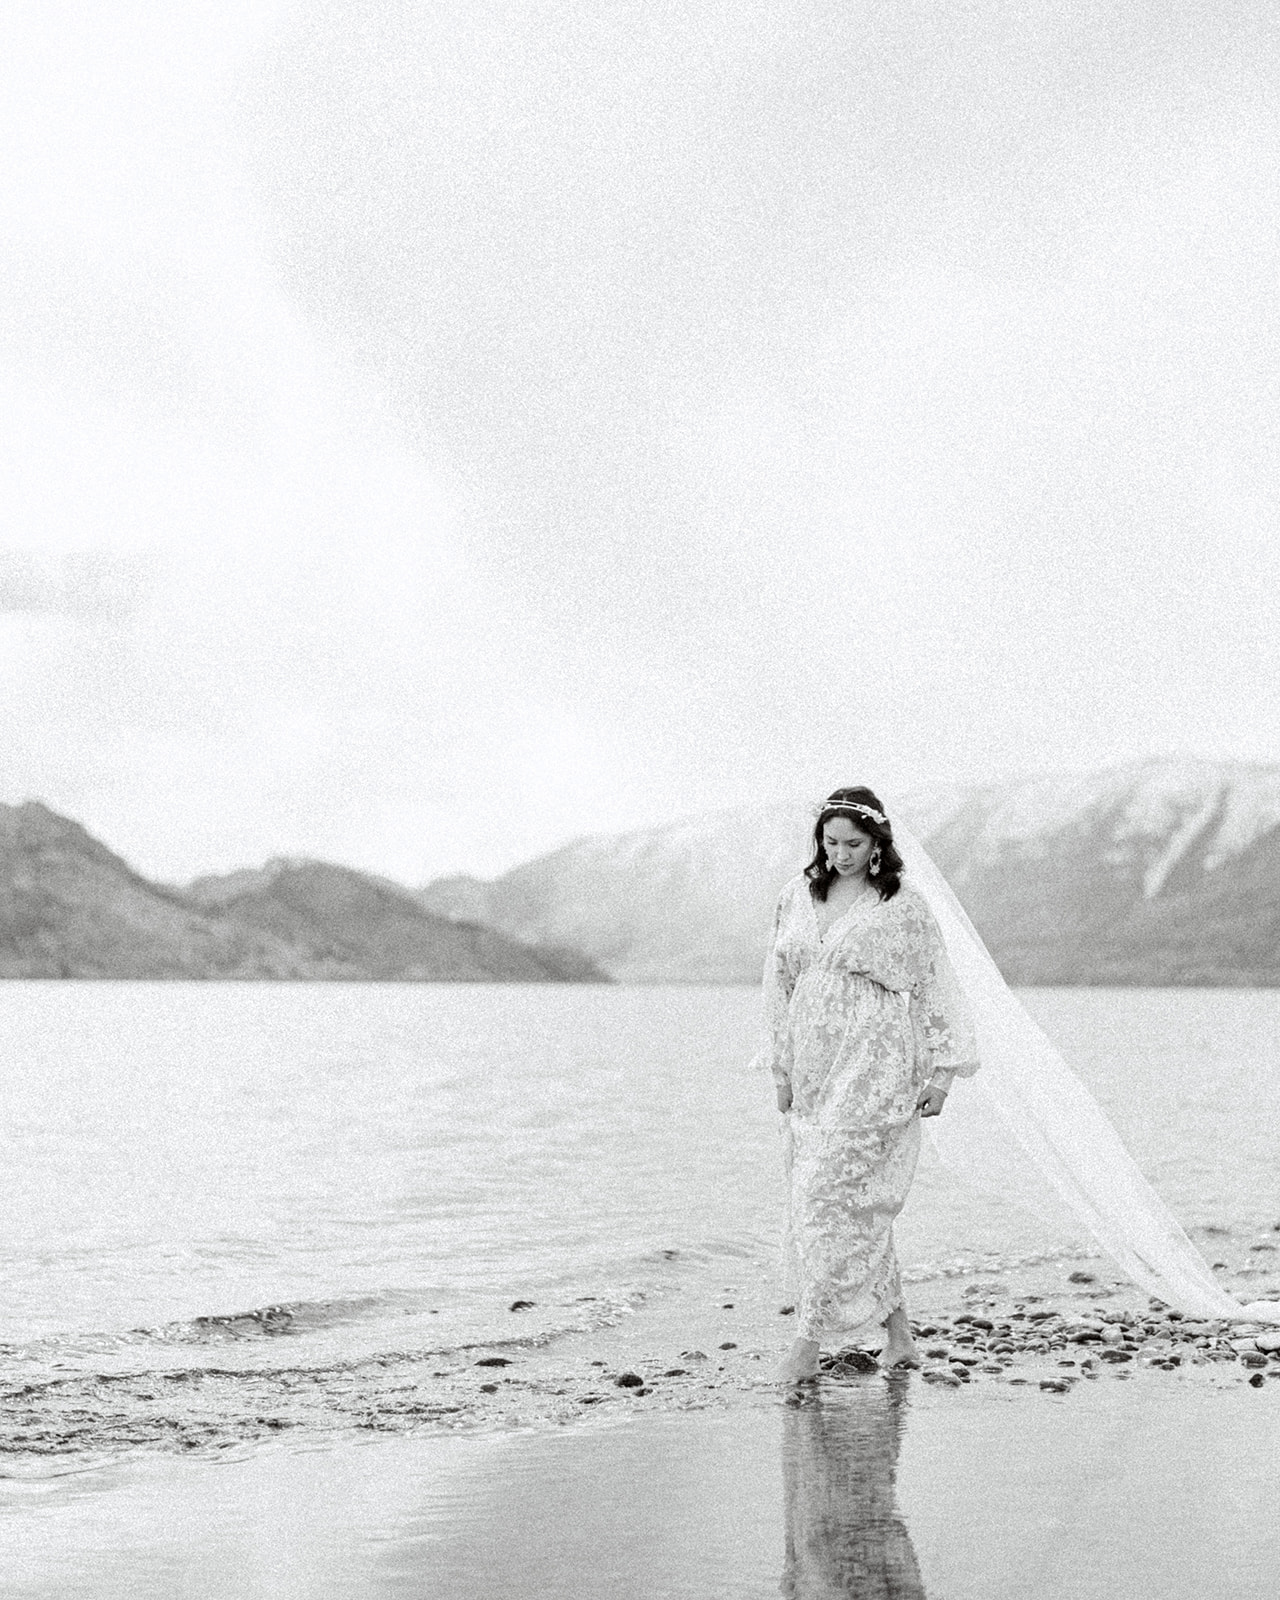 Stunning bridal portrait in an ethereal bridal editorial on Lake Okanagan, BC, featured on Brontë Bride. Unique styled elements that blend seamlessly with the majestic backdrop of the Canadian Rockies.